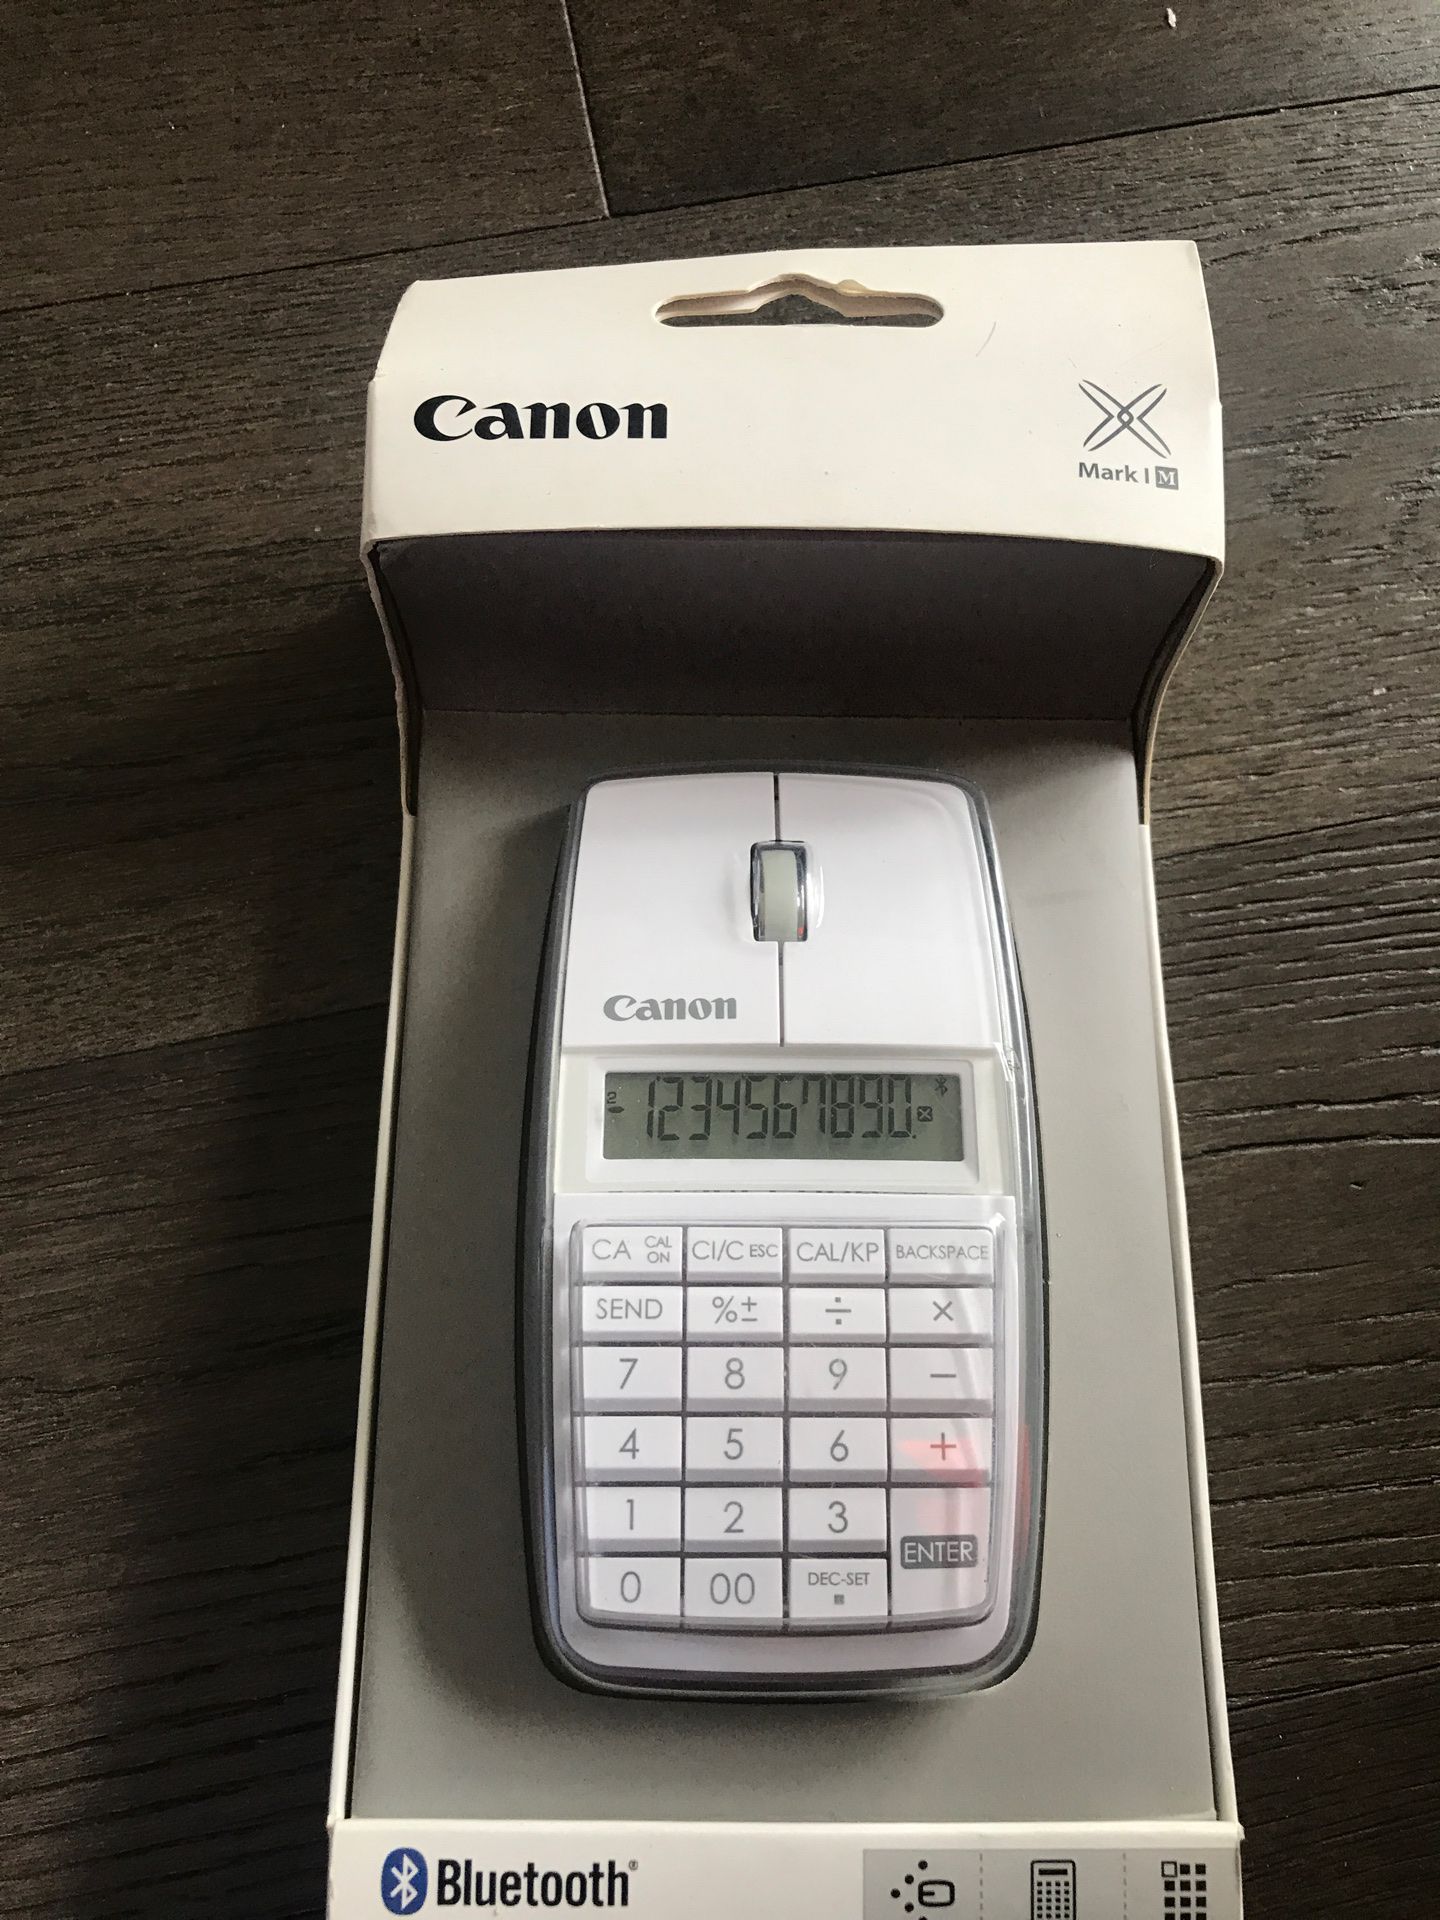 Brando in the box canon three in one wireless mouse calculator keypad as well